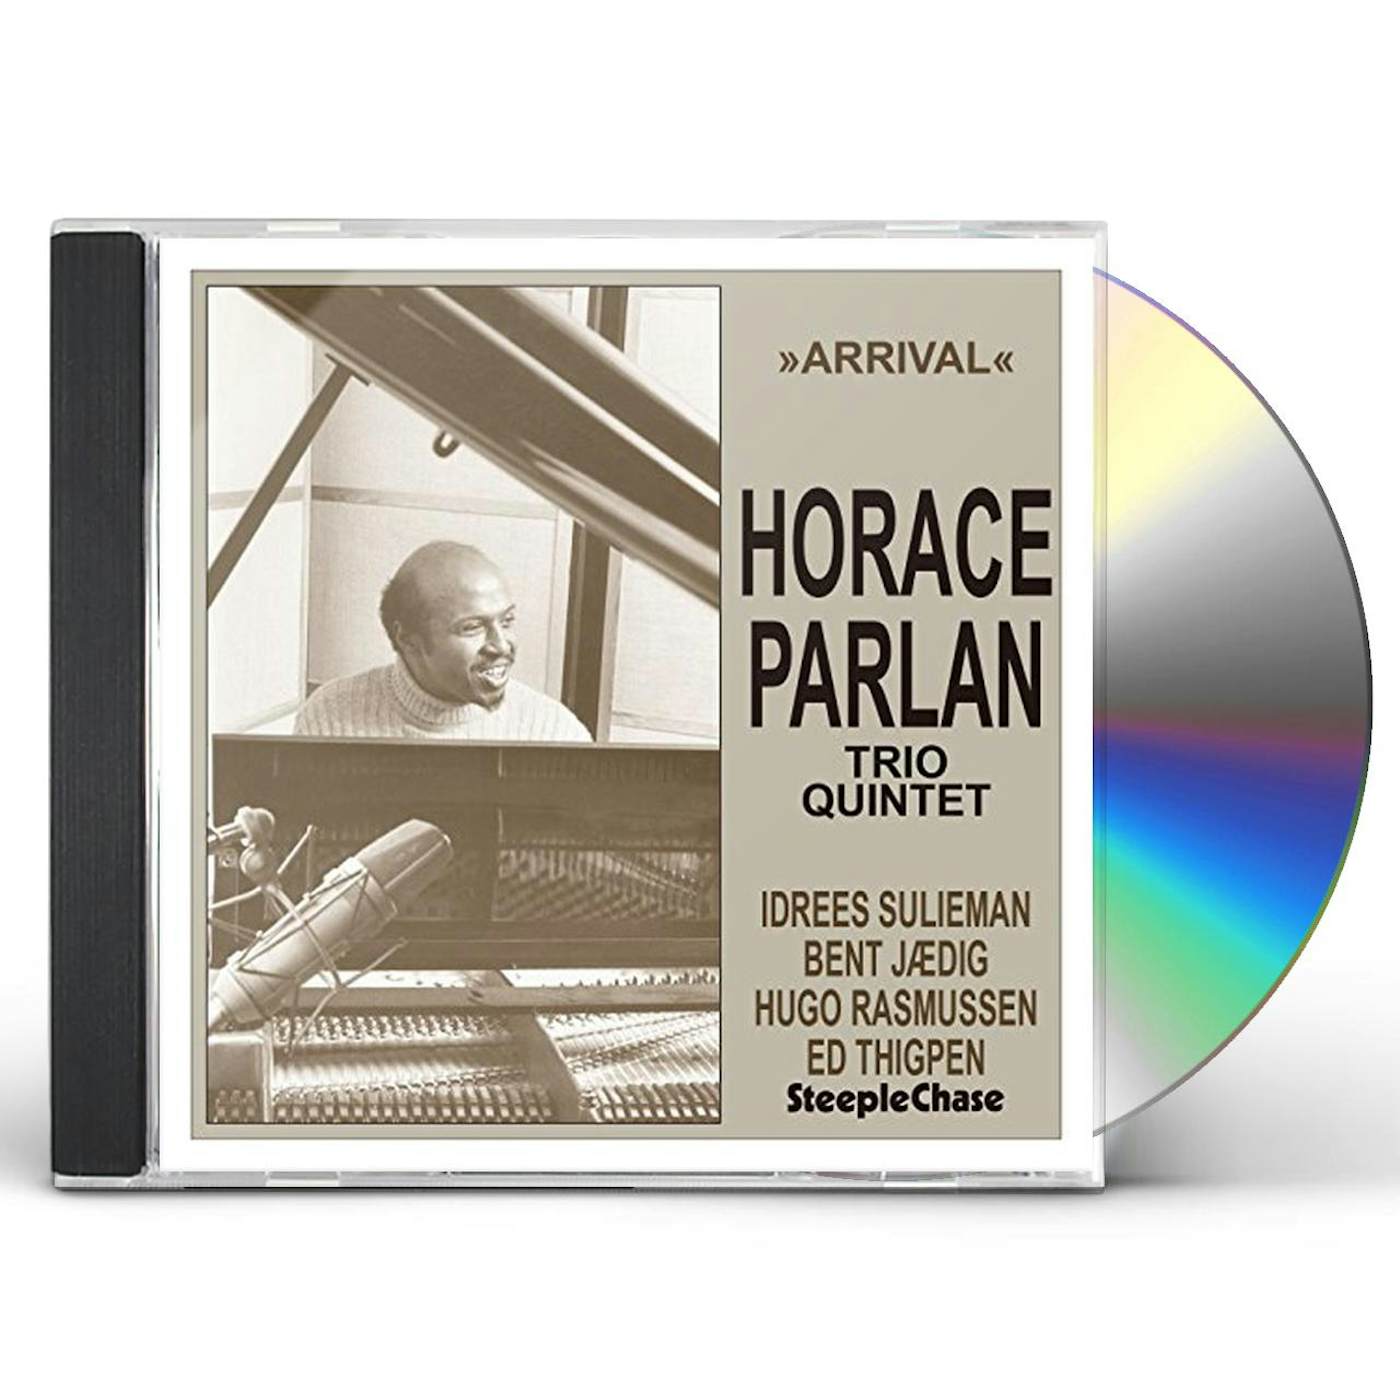 Horace Parlan ARRIVAL CD